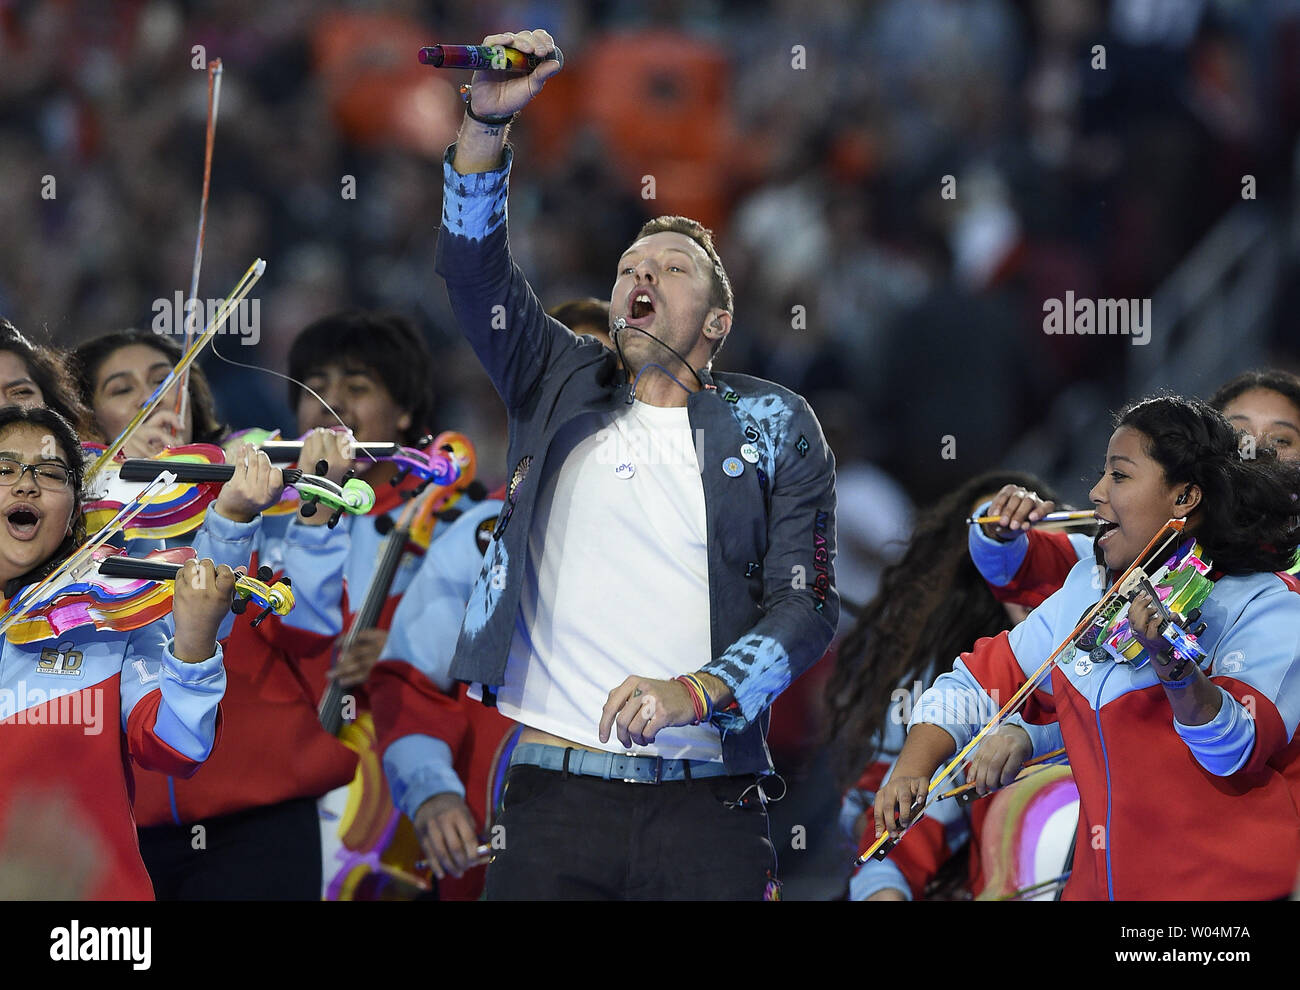 Coldplay to honor past, present and future at Super Bowl